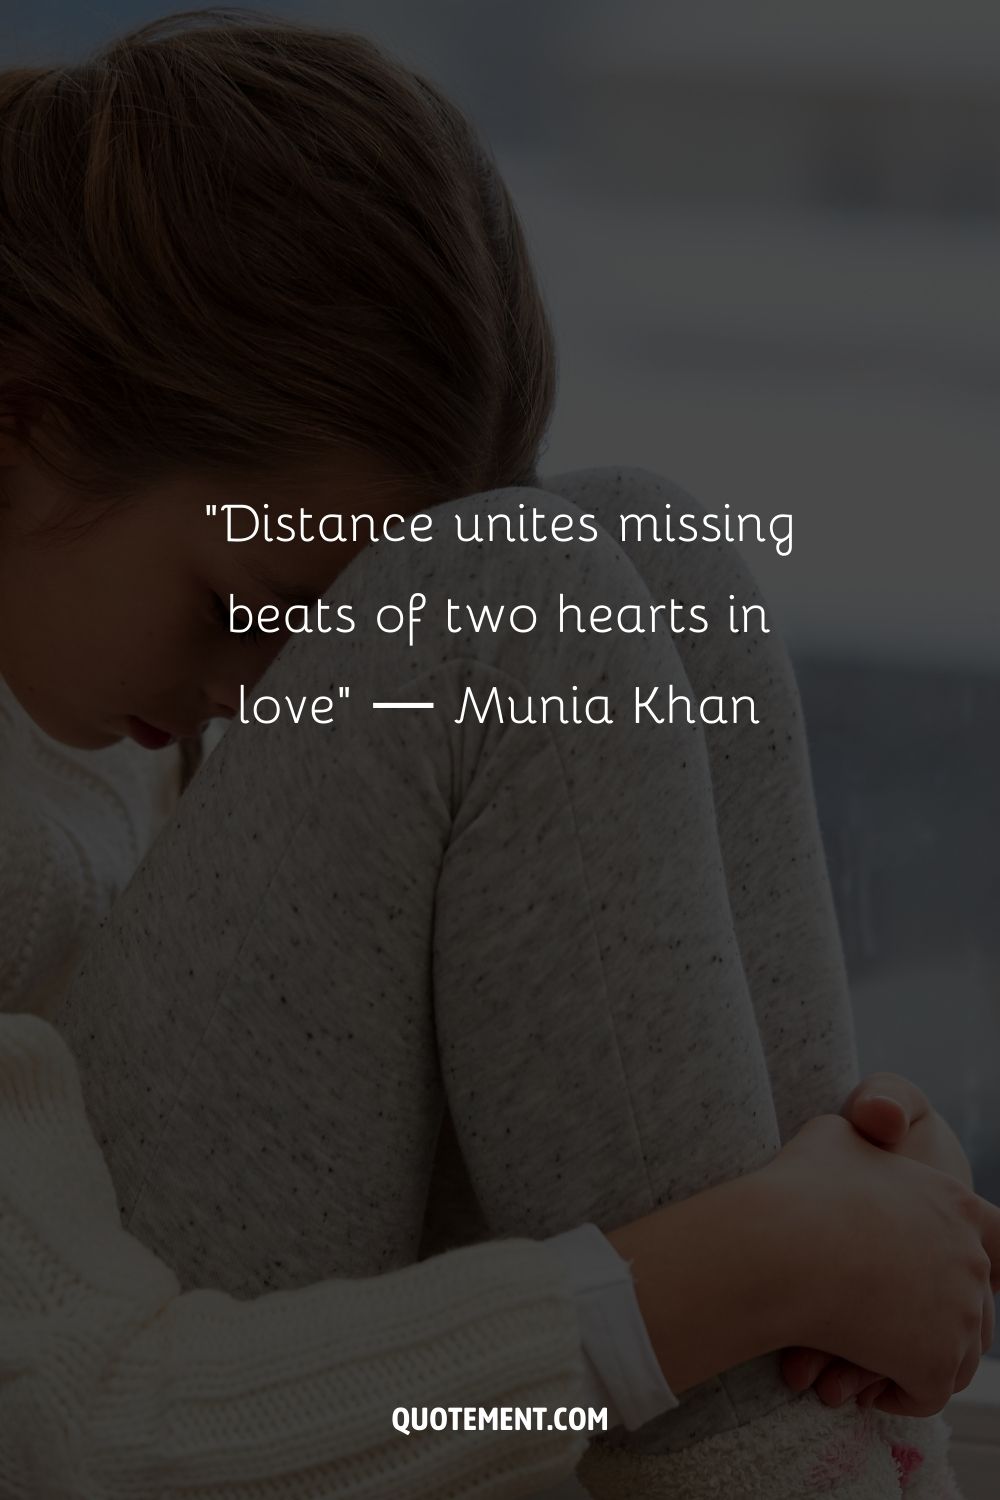 Distance unites missing beats of two hearts in love